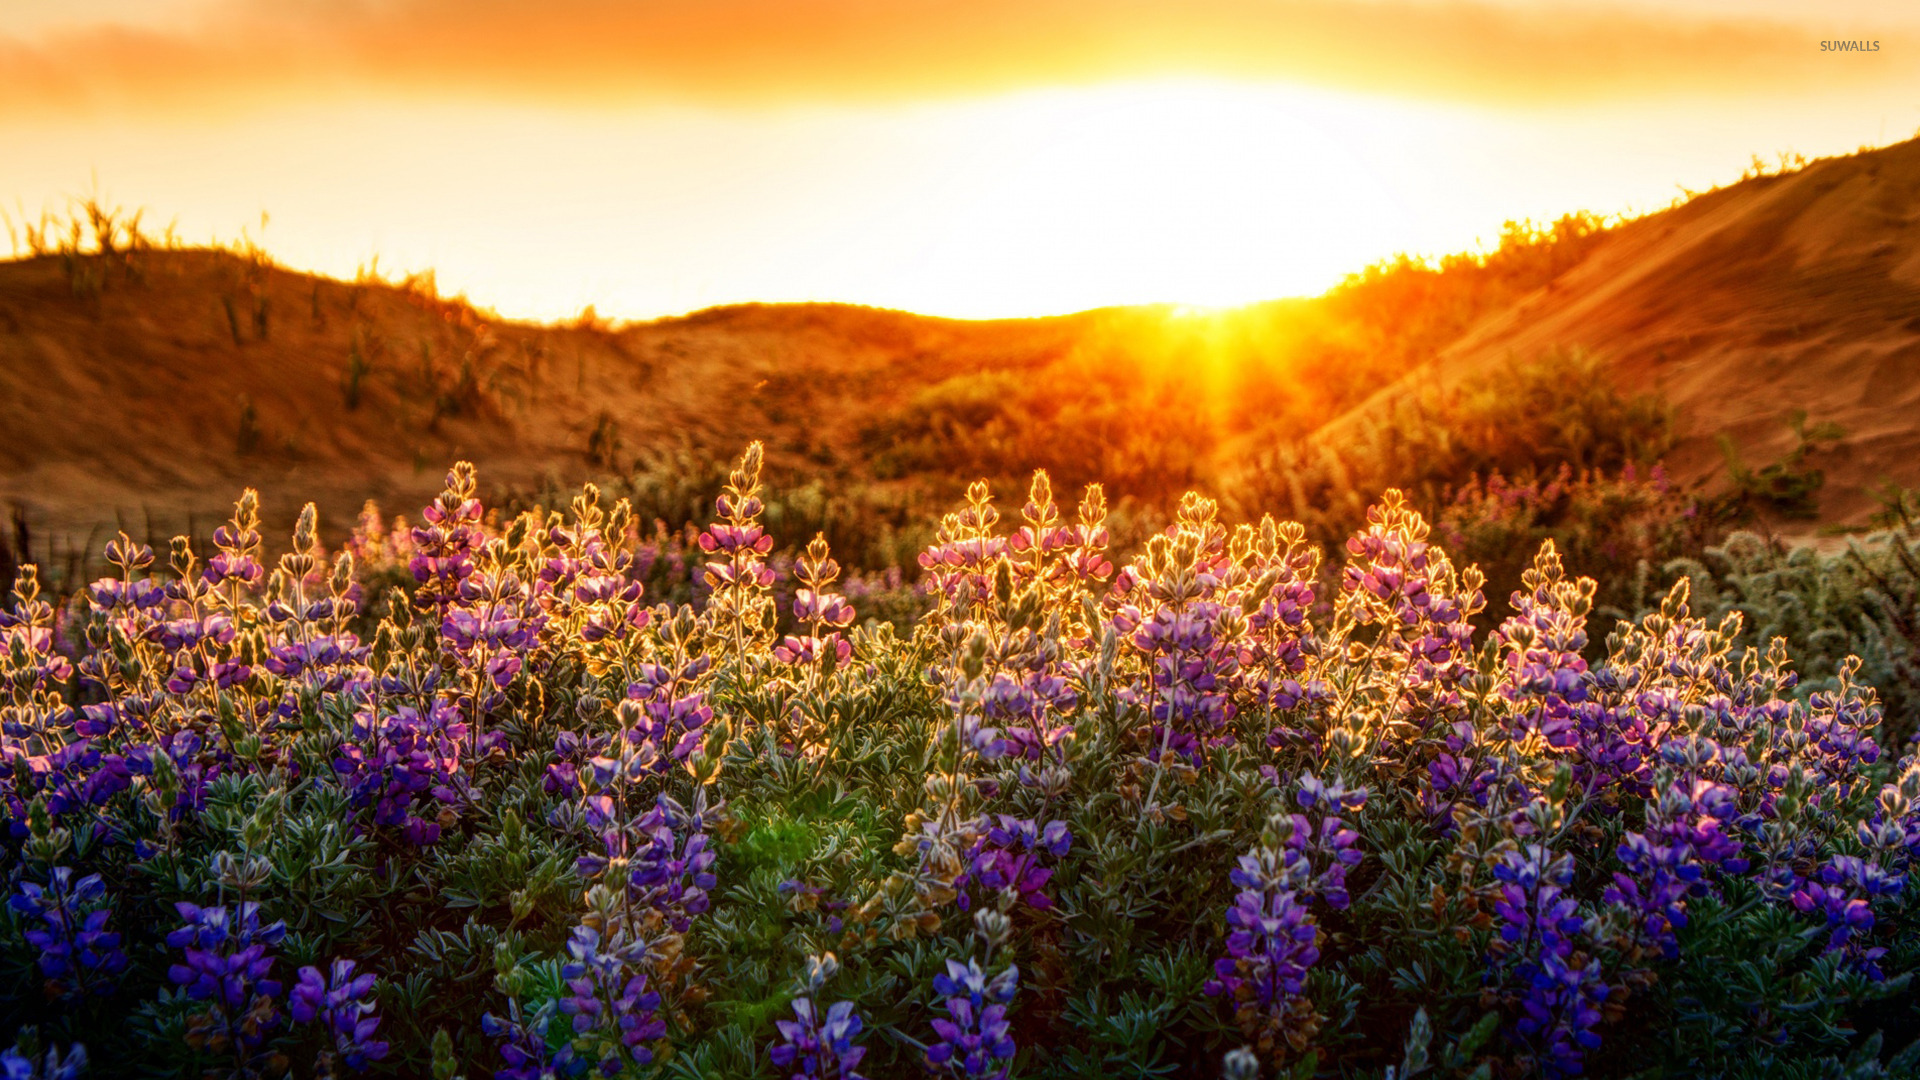 Purple Wildflowers In The Sunset Wallpaper Nature Wallpapers 31128